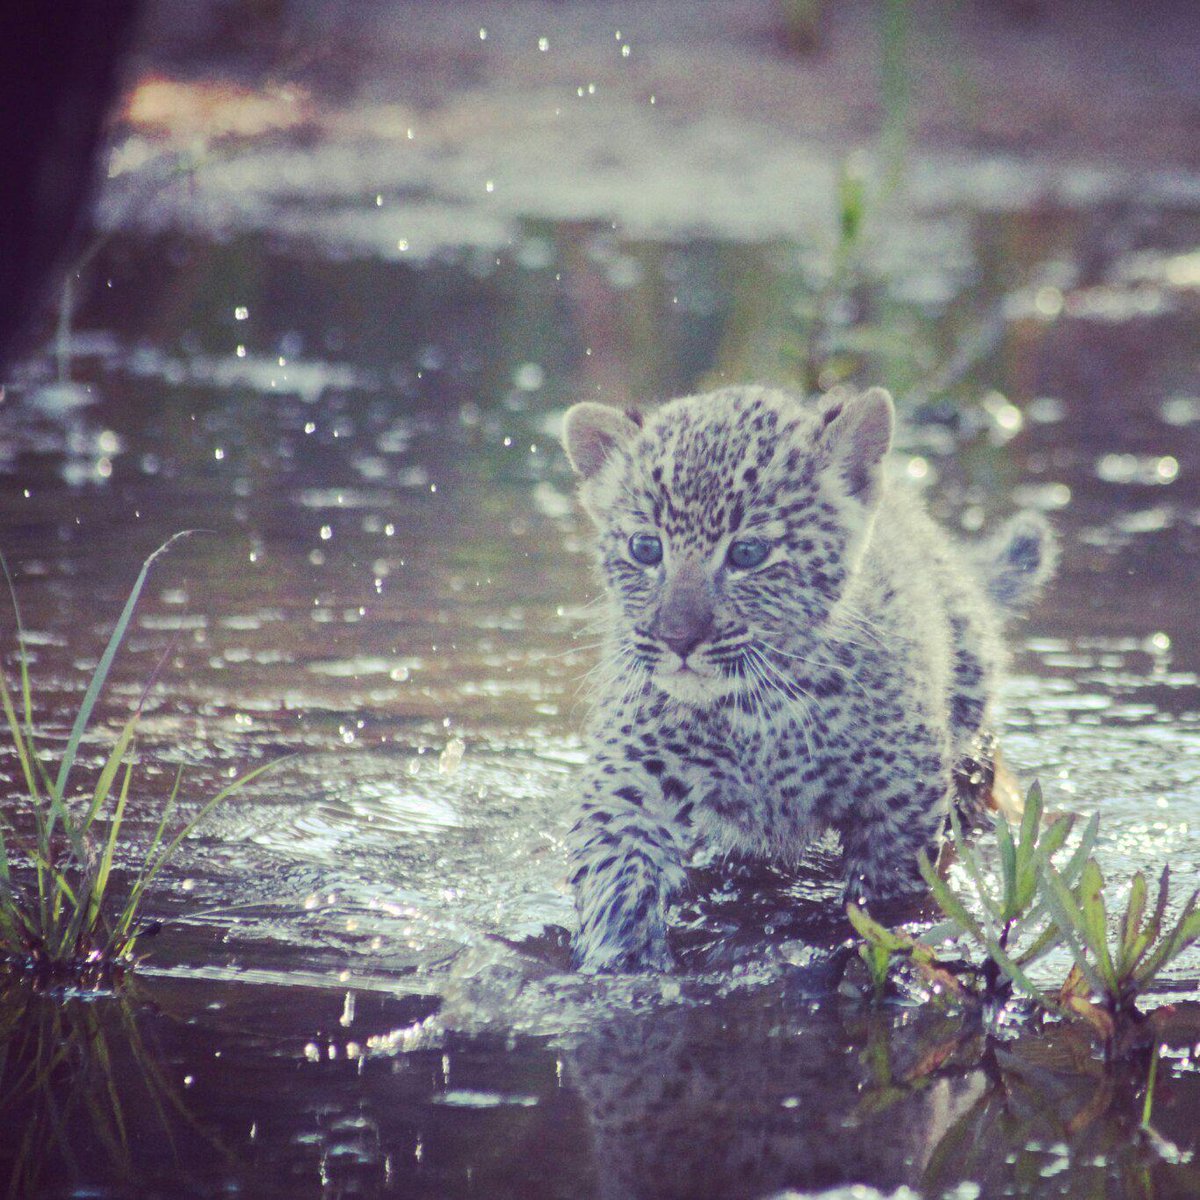 Leopard cub tentatively splashes through water with great concentration #leopards #cute #nature #conservewildlife